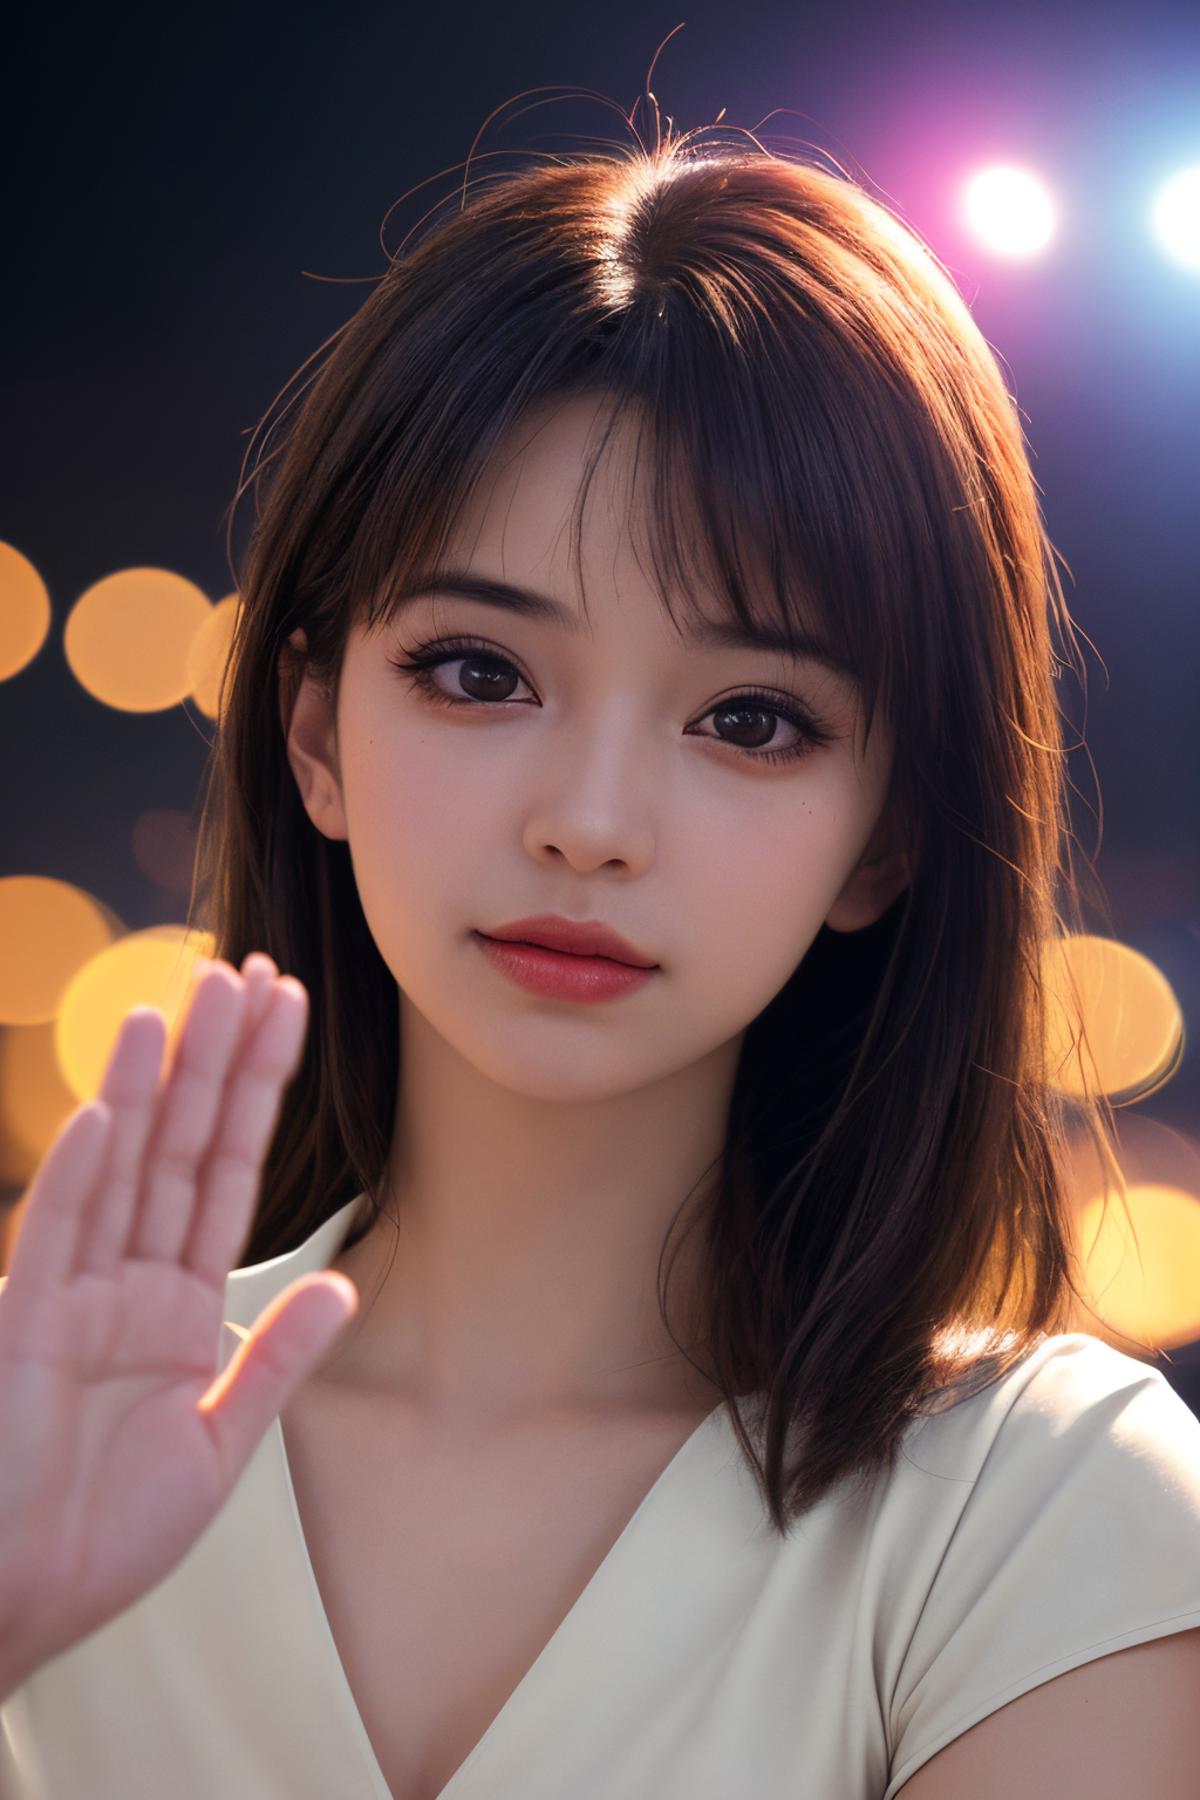 AI model image by lianghuiting0505447